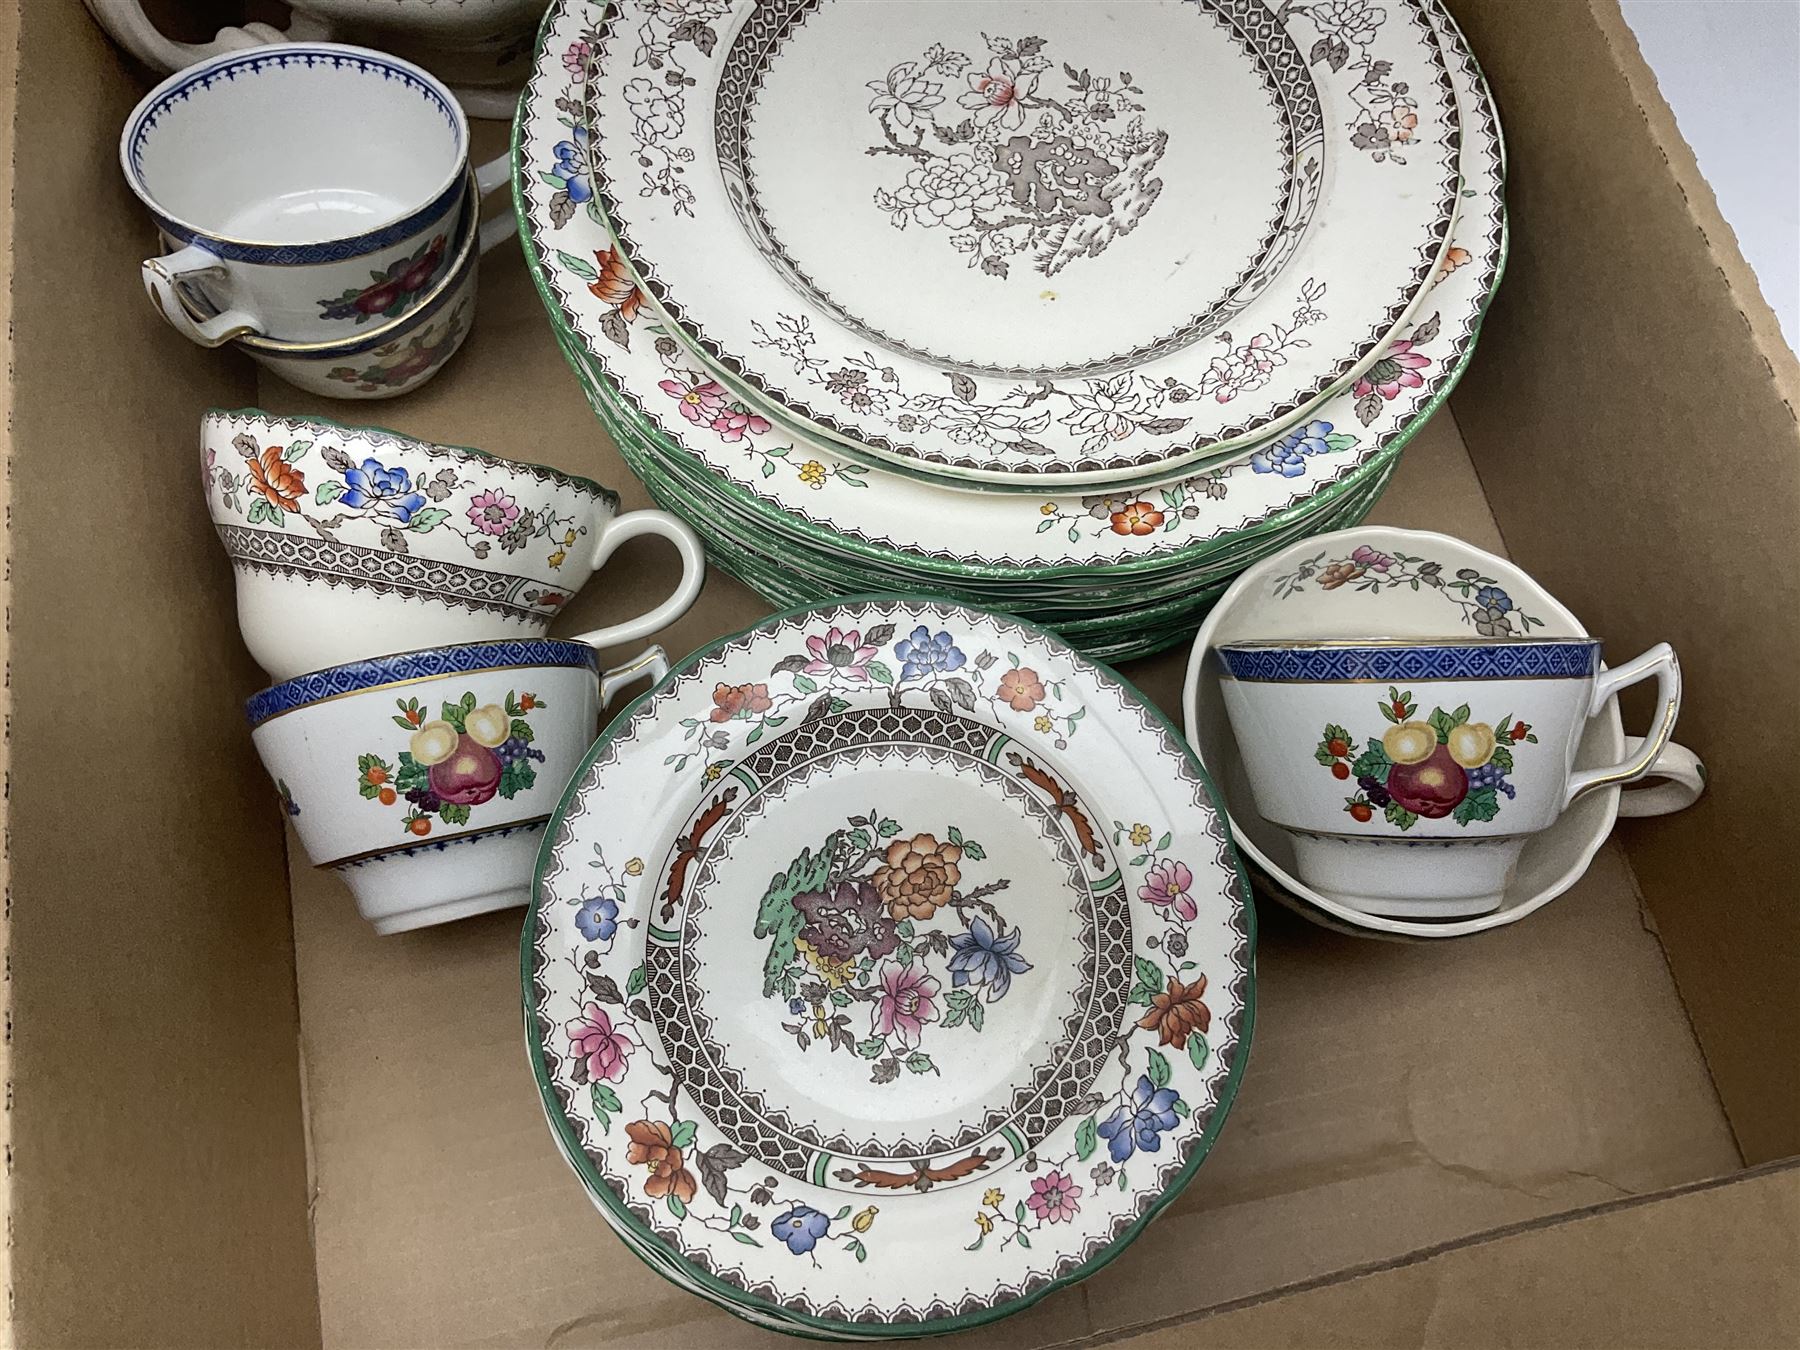 Copeland Spode Chinese Rose pattern dinner and tea wares - Image 9 of 22